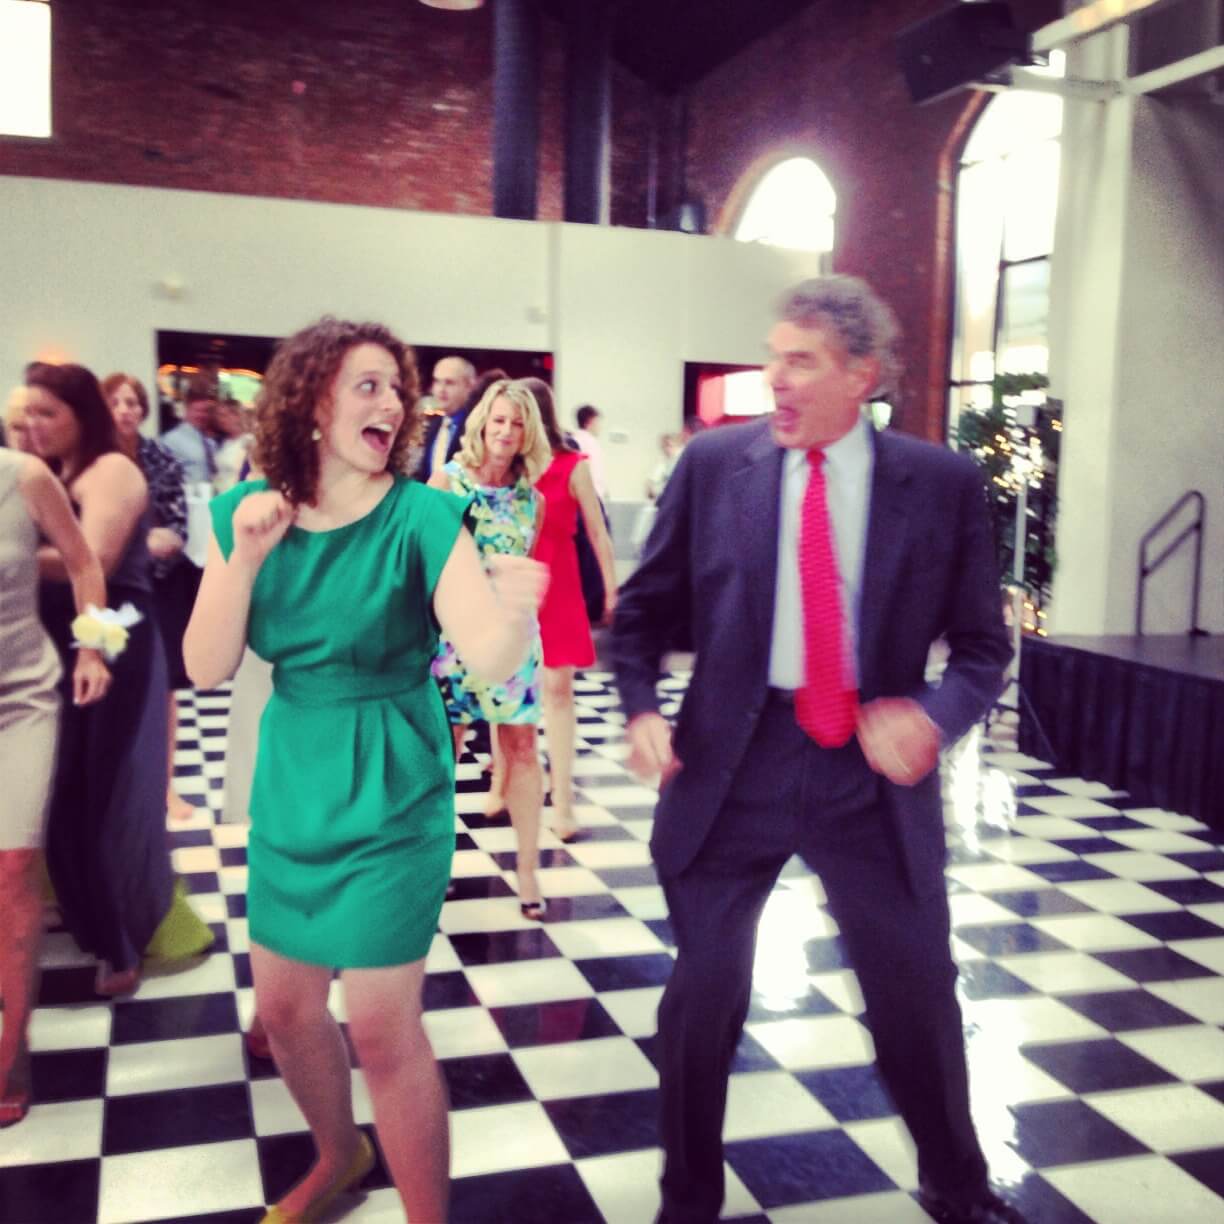 Dancing with Dad at my cousin's wedding!